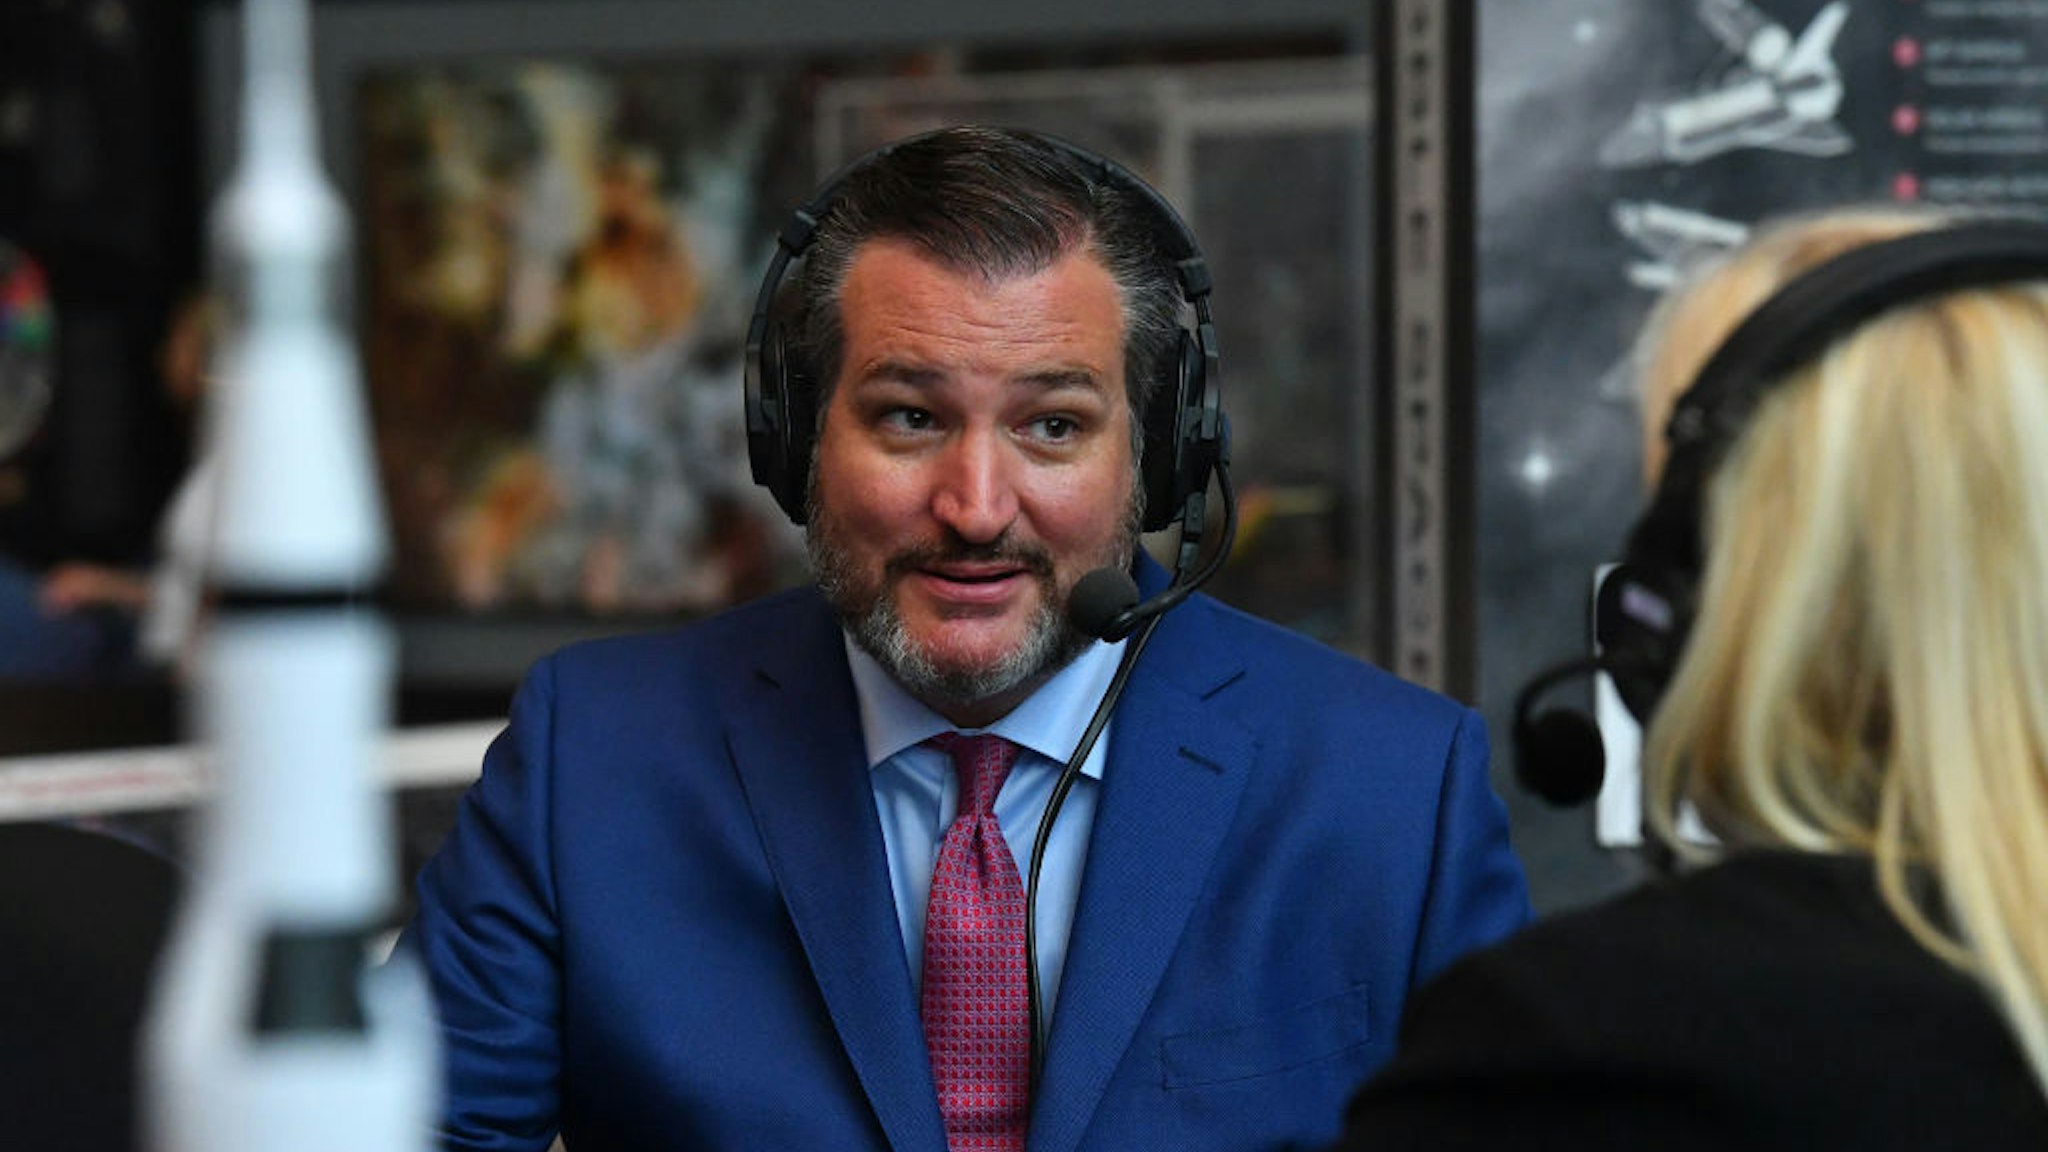 US Senator Ted Cruz (R-TX) talks with SiriusXM host Julie Mason at The National Air and Space Museum on July 17, 2019 in Washington, DC.